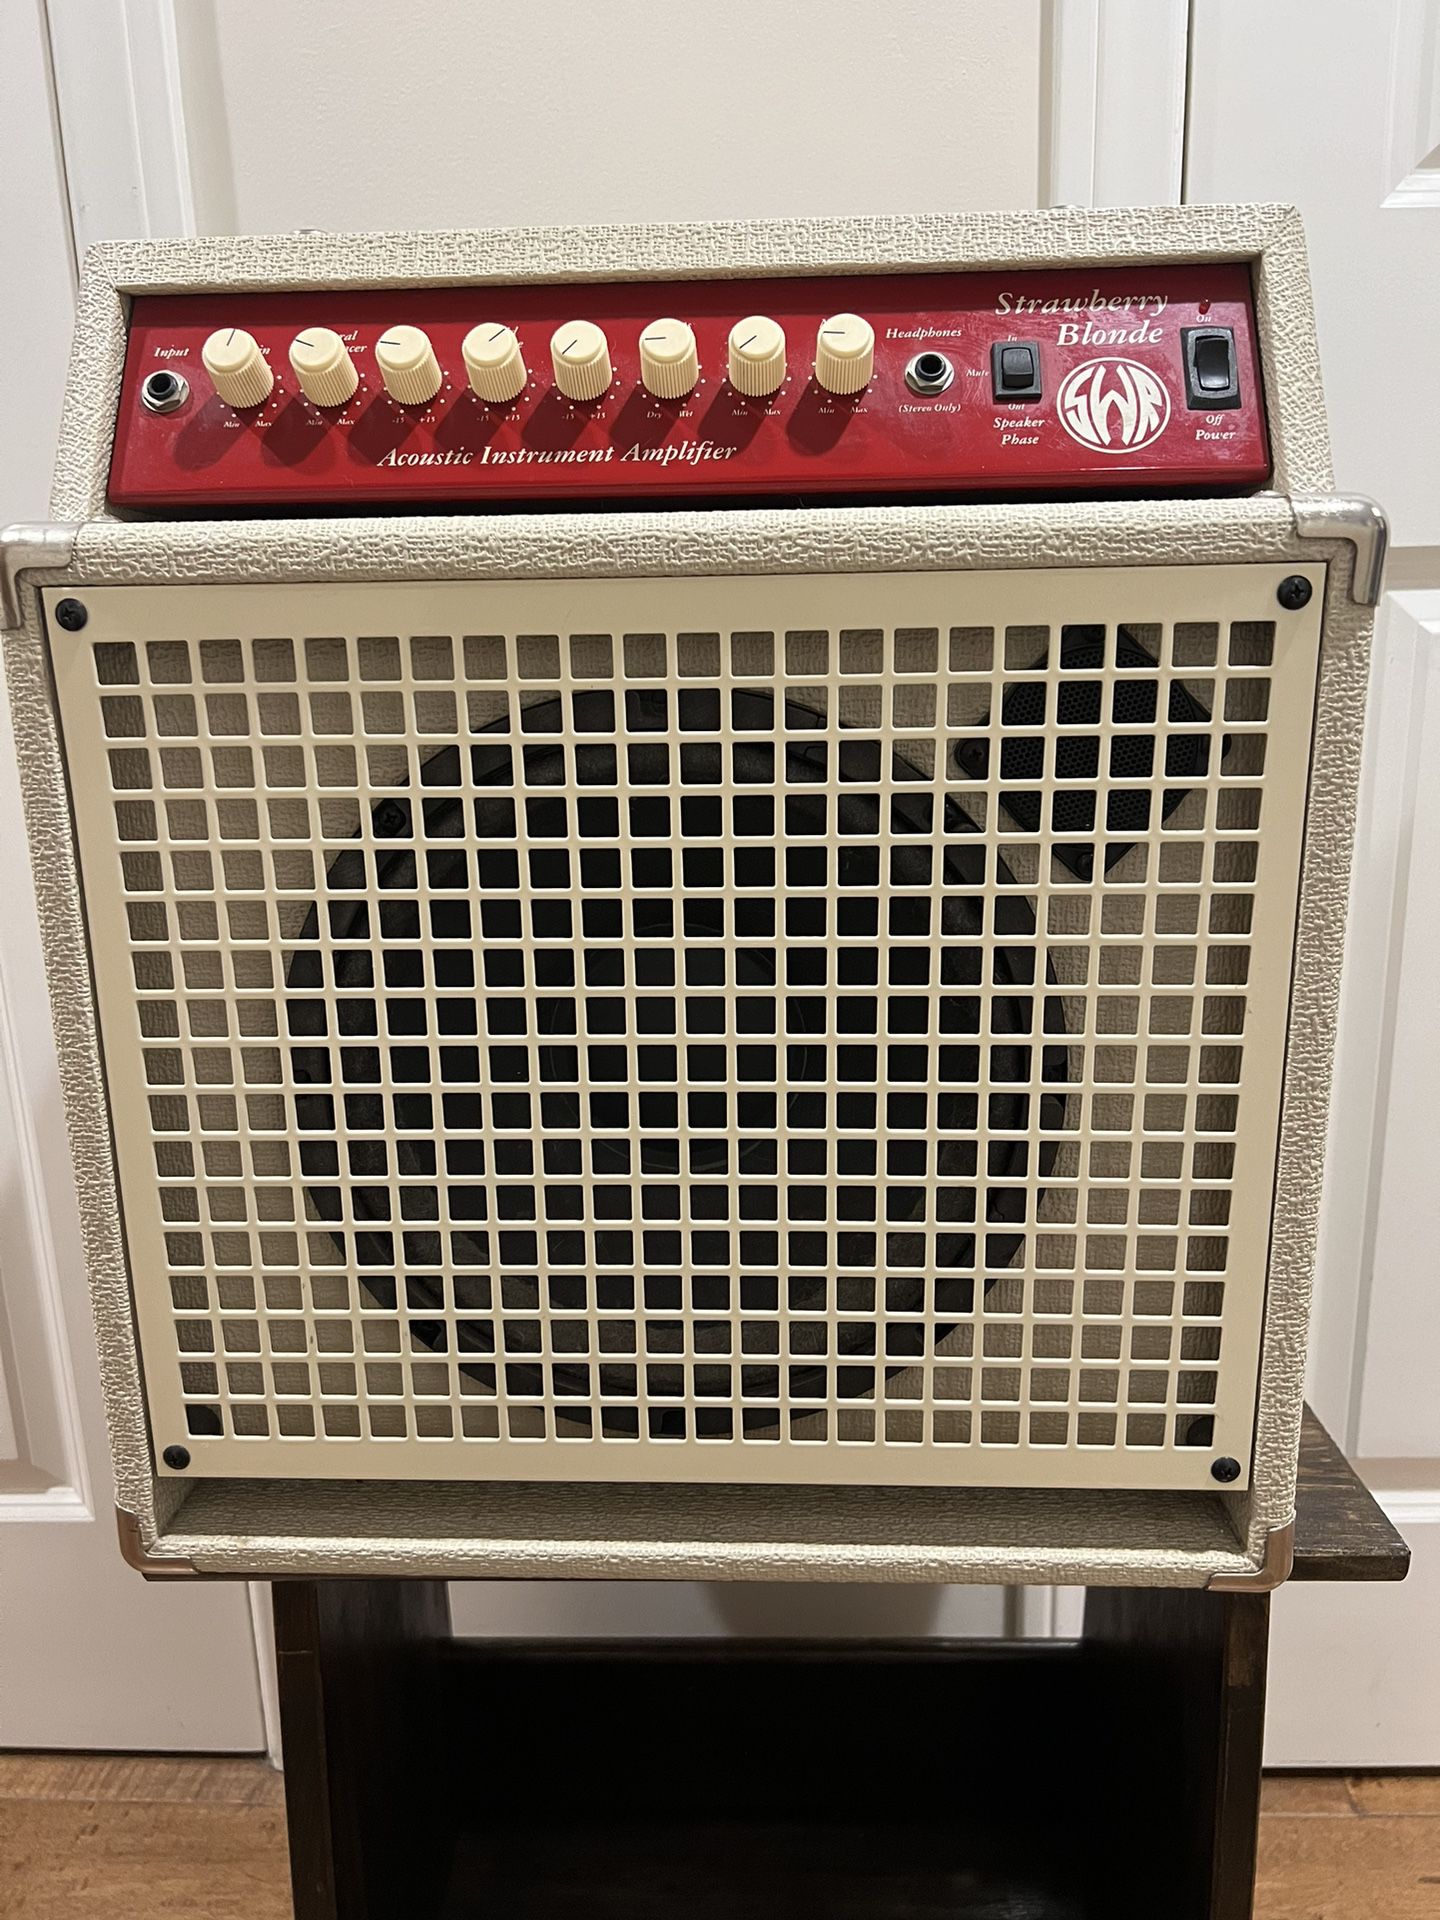 Strawberry Blonde acoustic amp